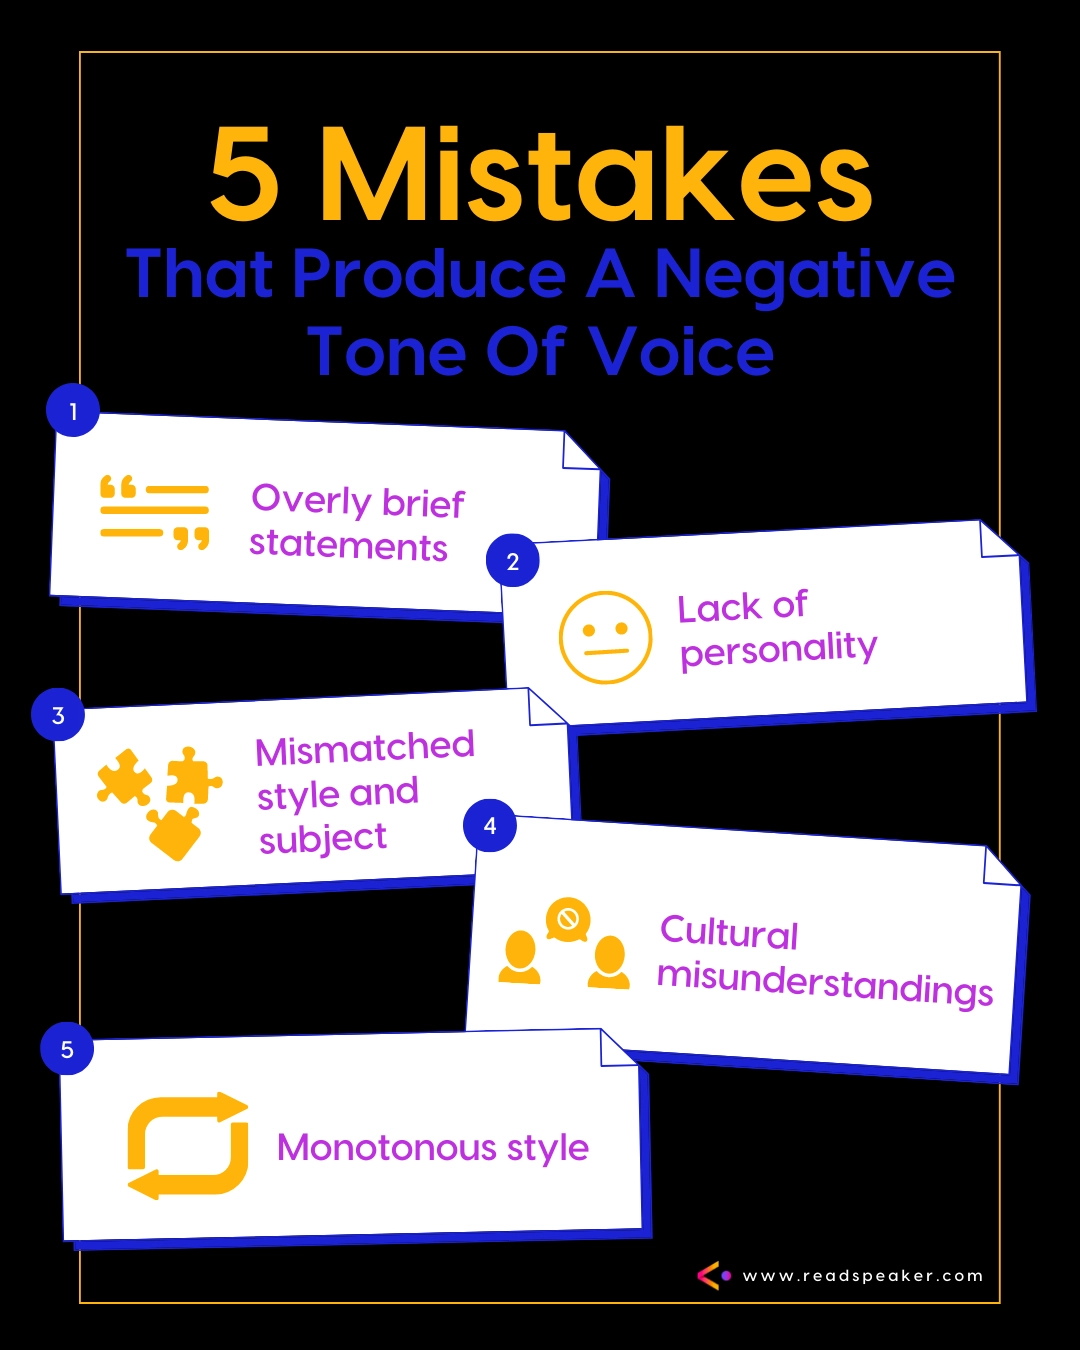 Examples of Negative Tone of Voice: 5 Errors That Can Hurt Your Brand